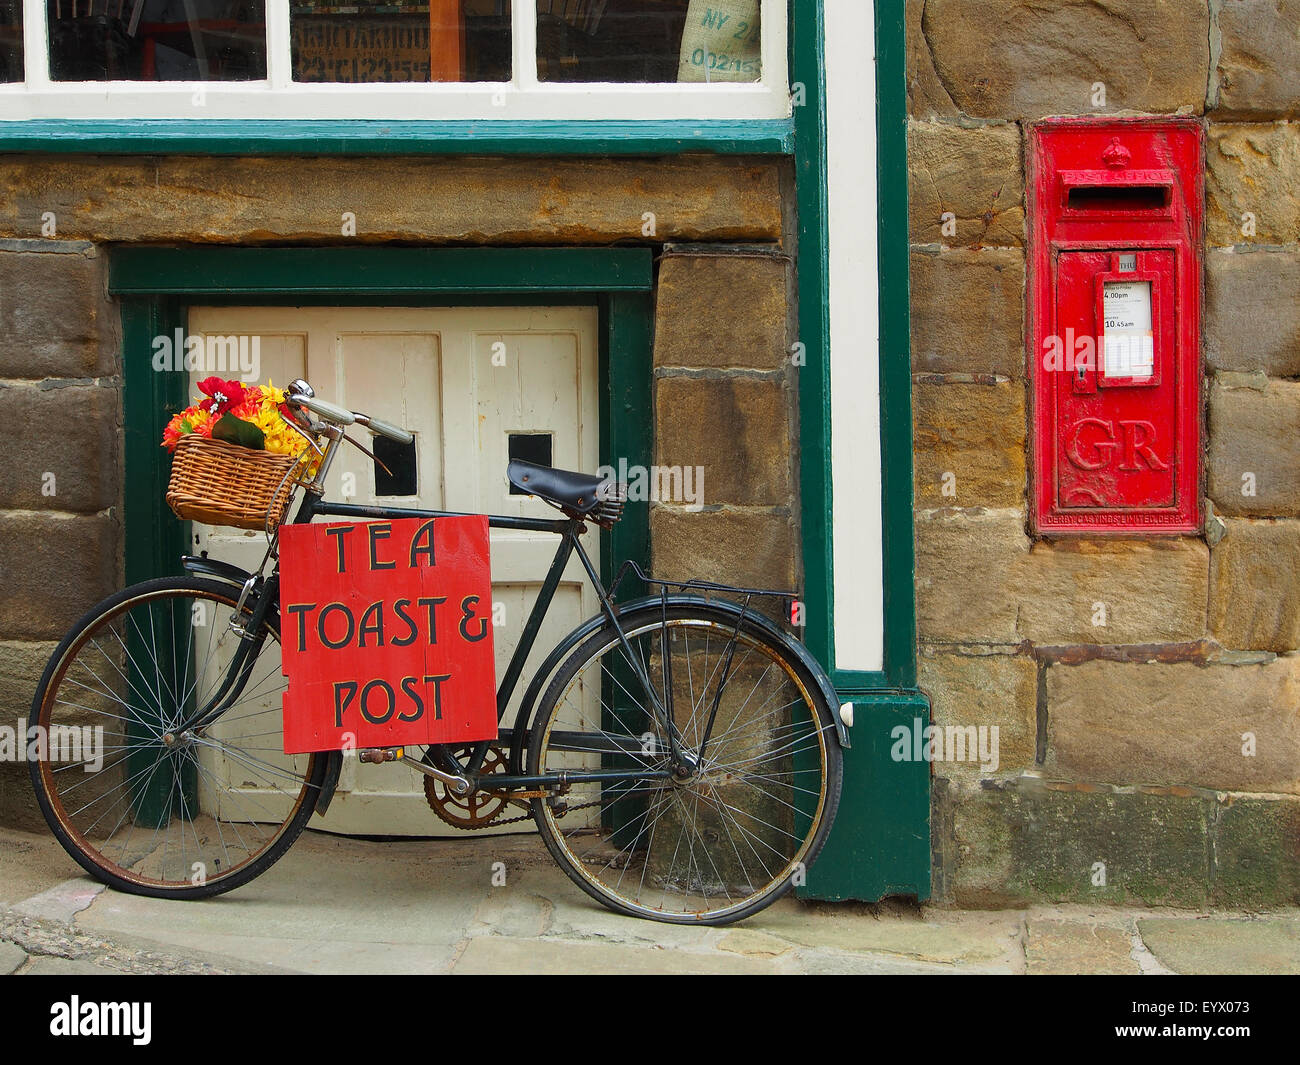 bicycle-sign-advertising-tea-toast-and-p